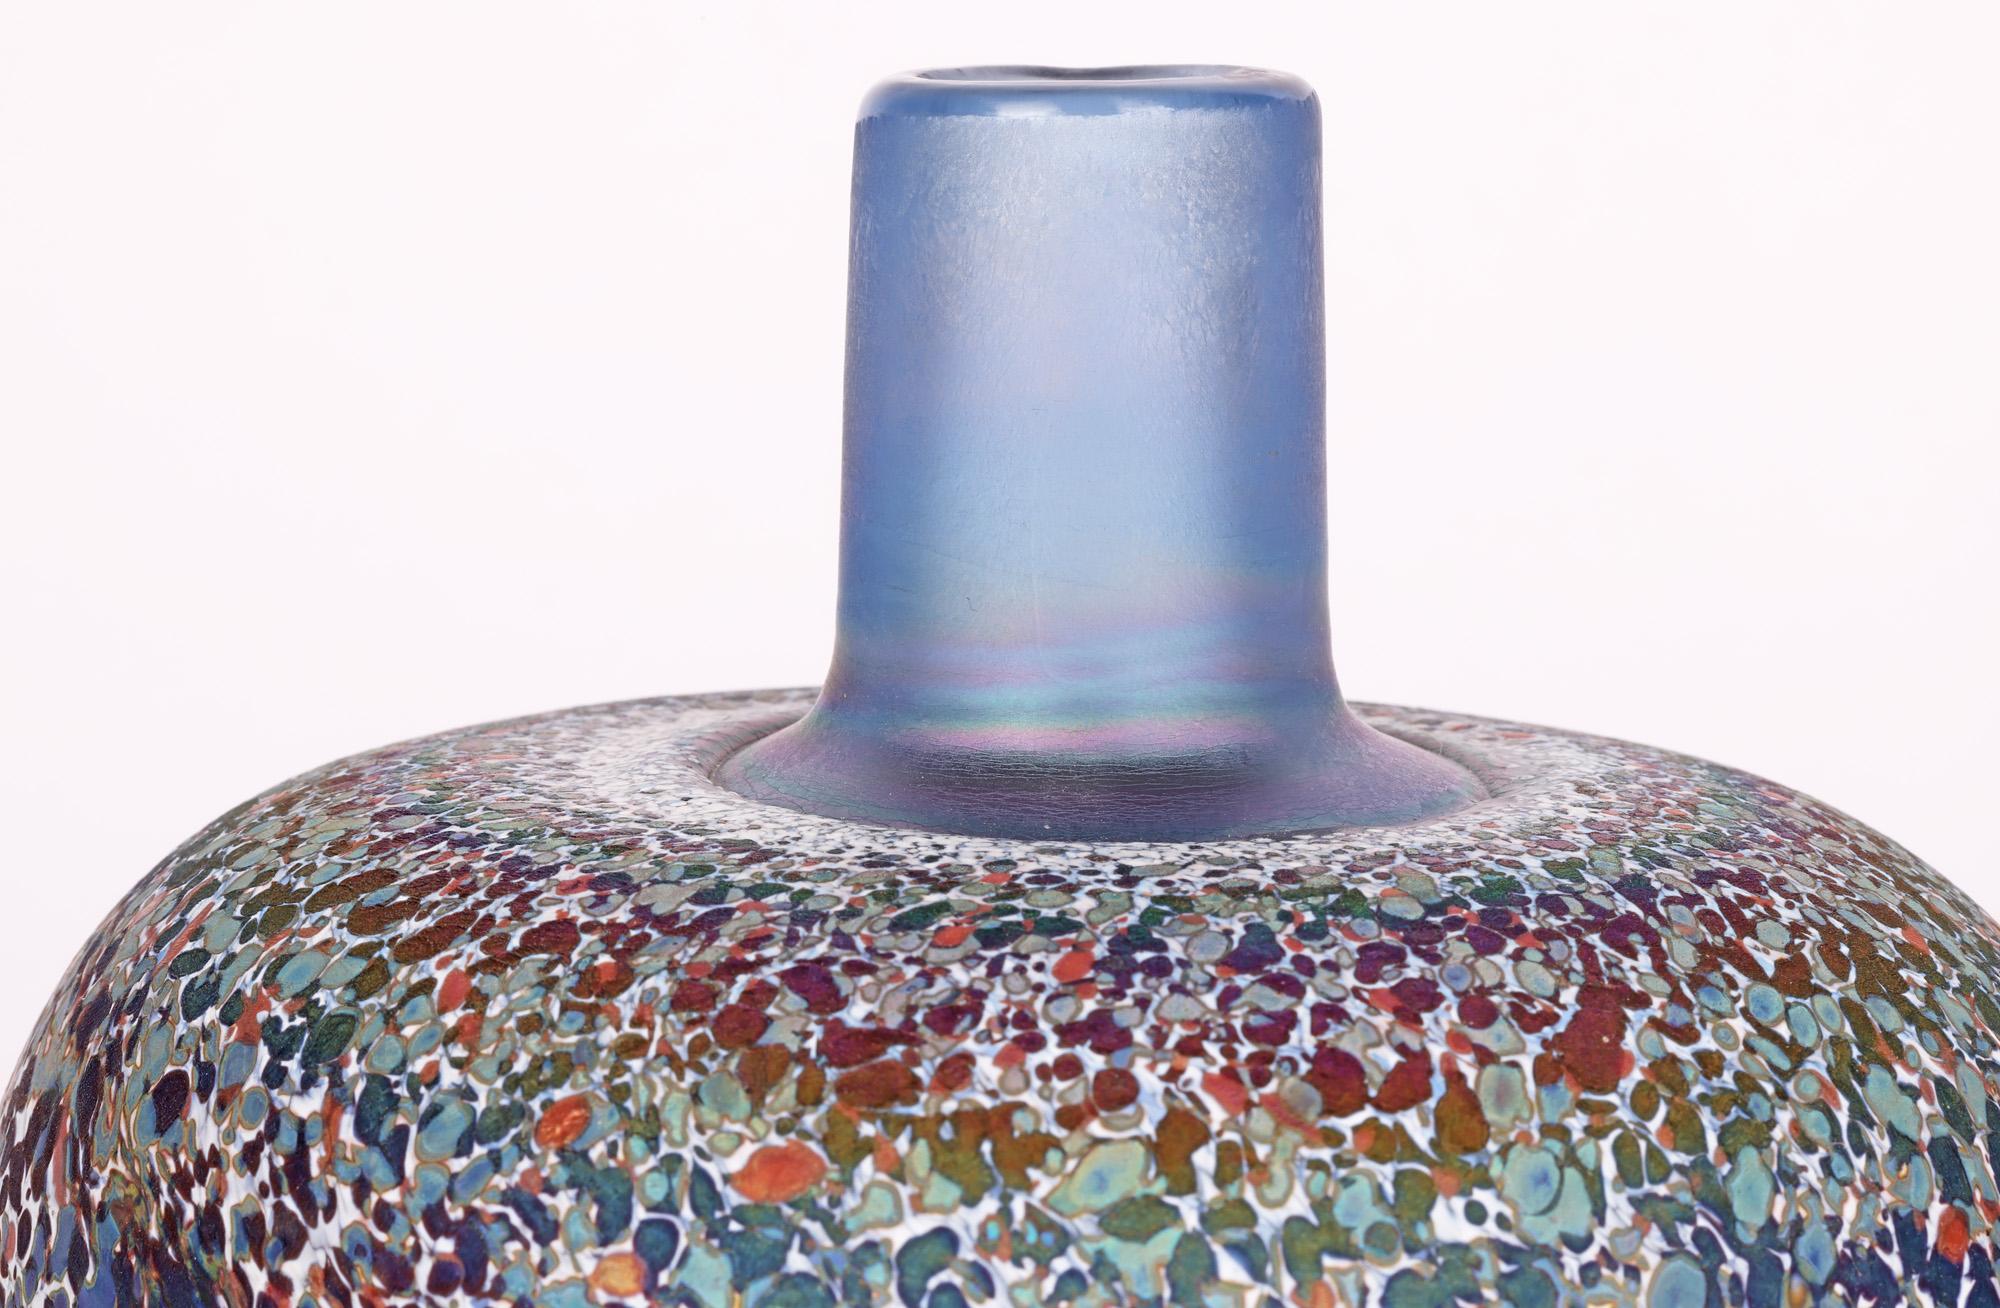 A rare and striking Swedish art glass vase made for Kosta Boda by renowned glass maker Bertil Vallien (Swedish, b.1938) and dating from the 1970’s. The square bodied vase is decorated in colored confetti pattern and and is one of a series of